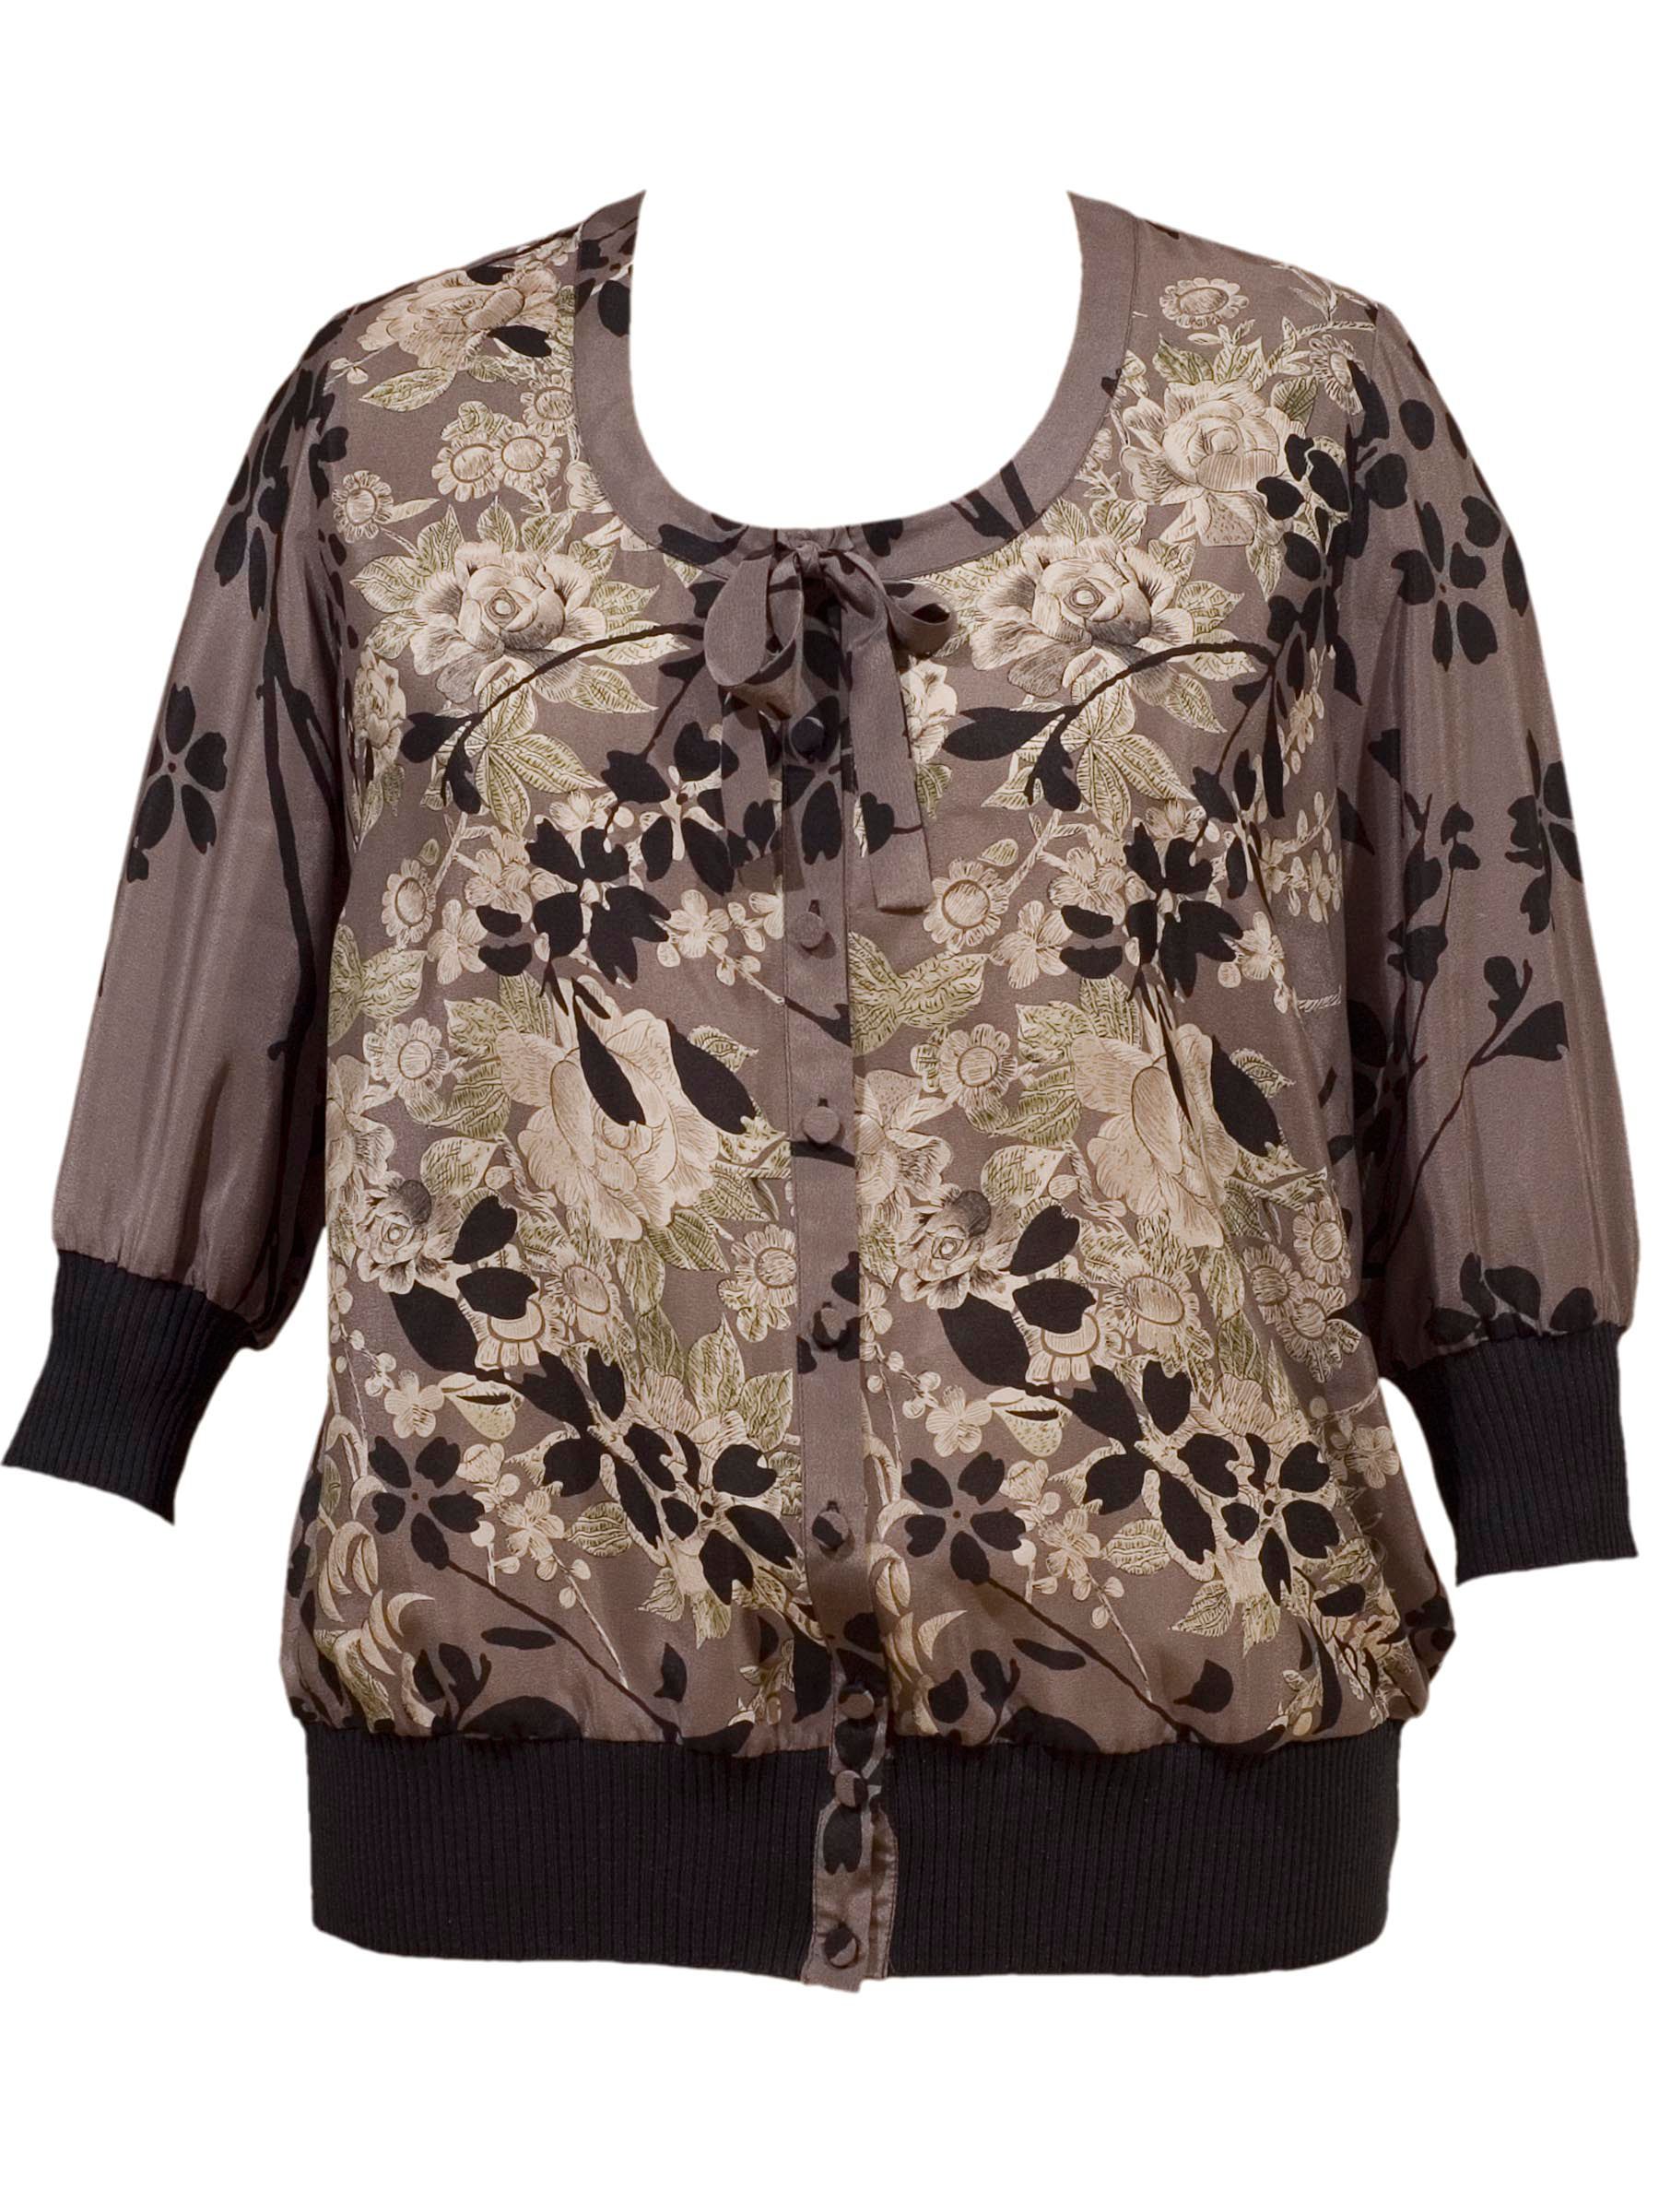 Chesca Ribbed Trim Floral Print Silk Blouse,